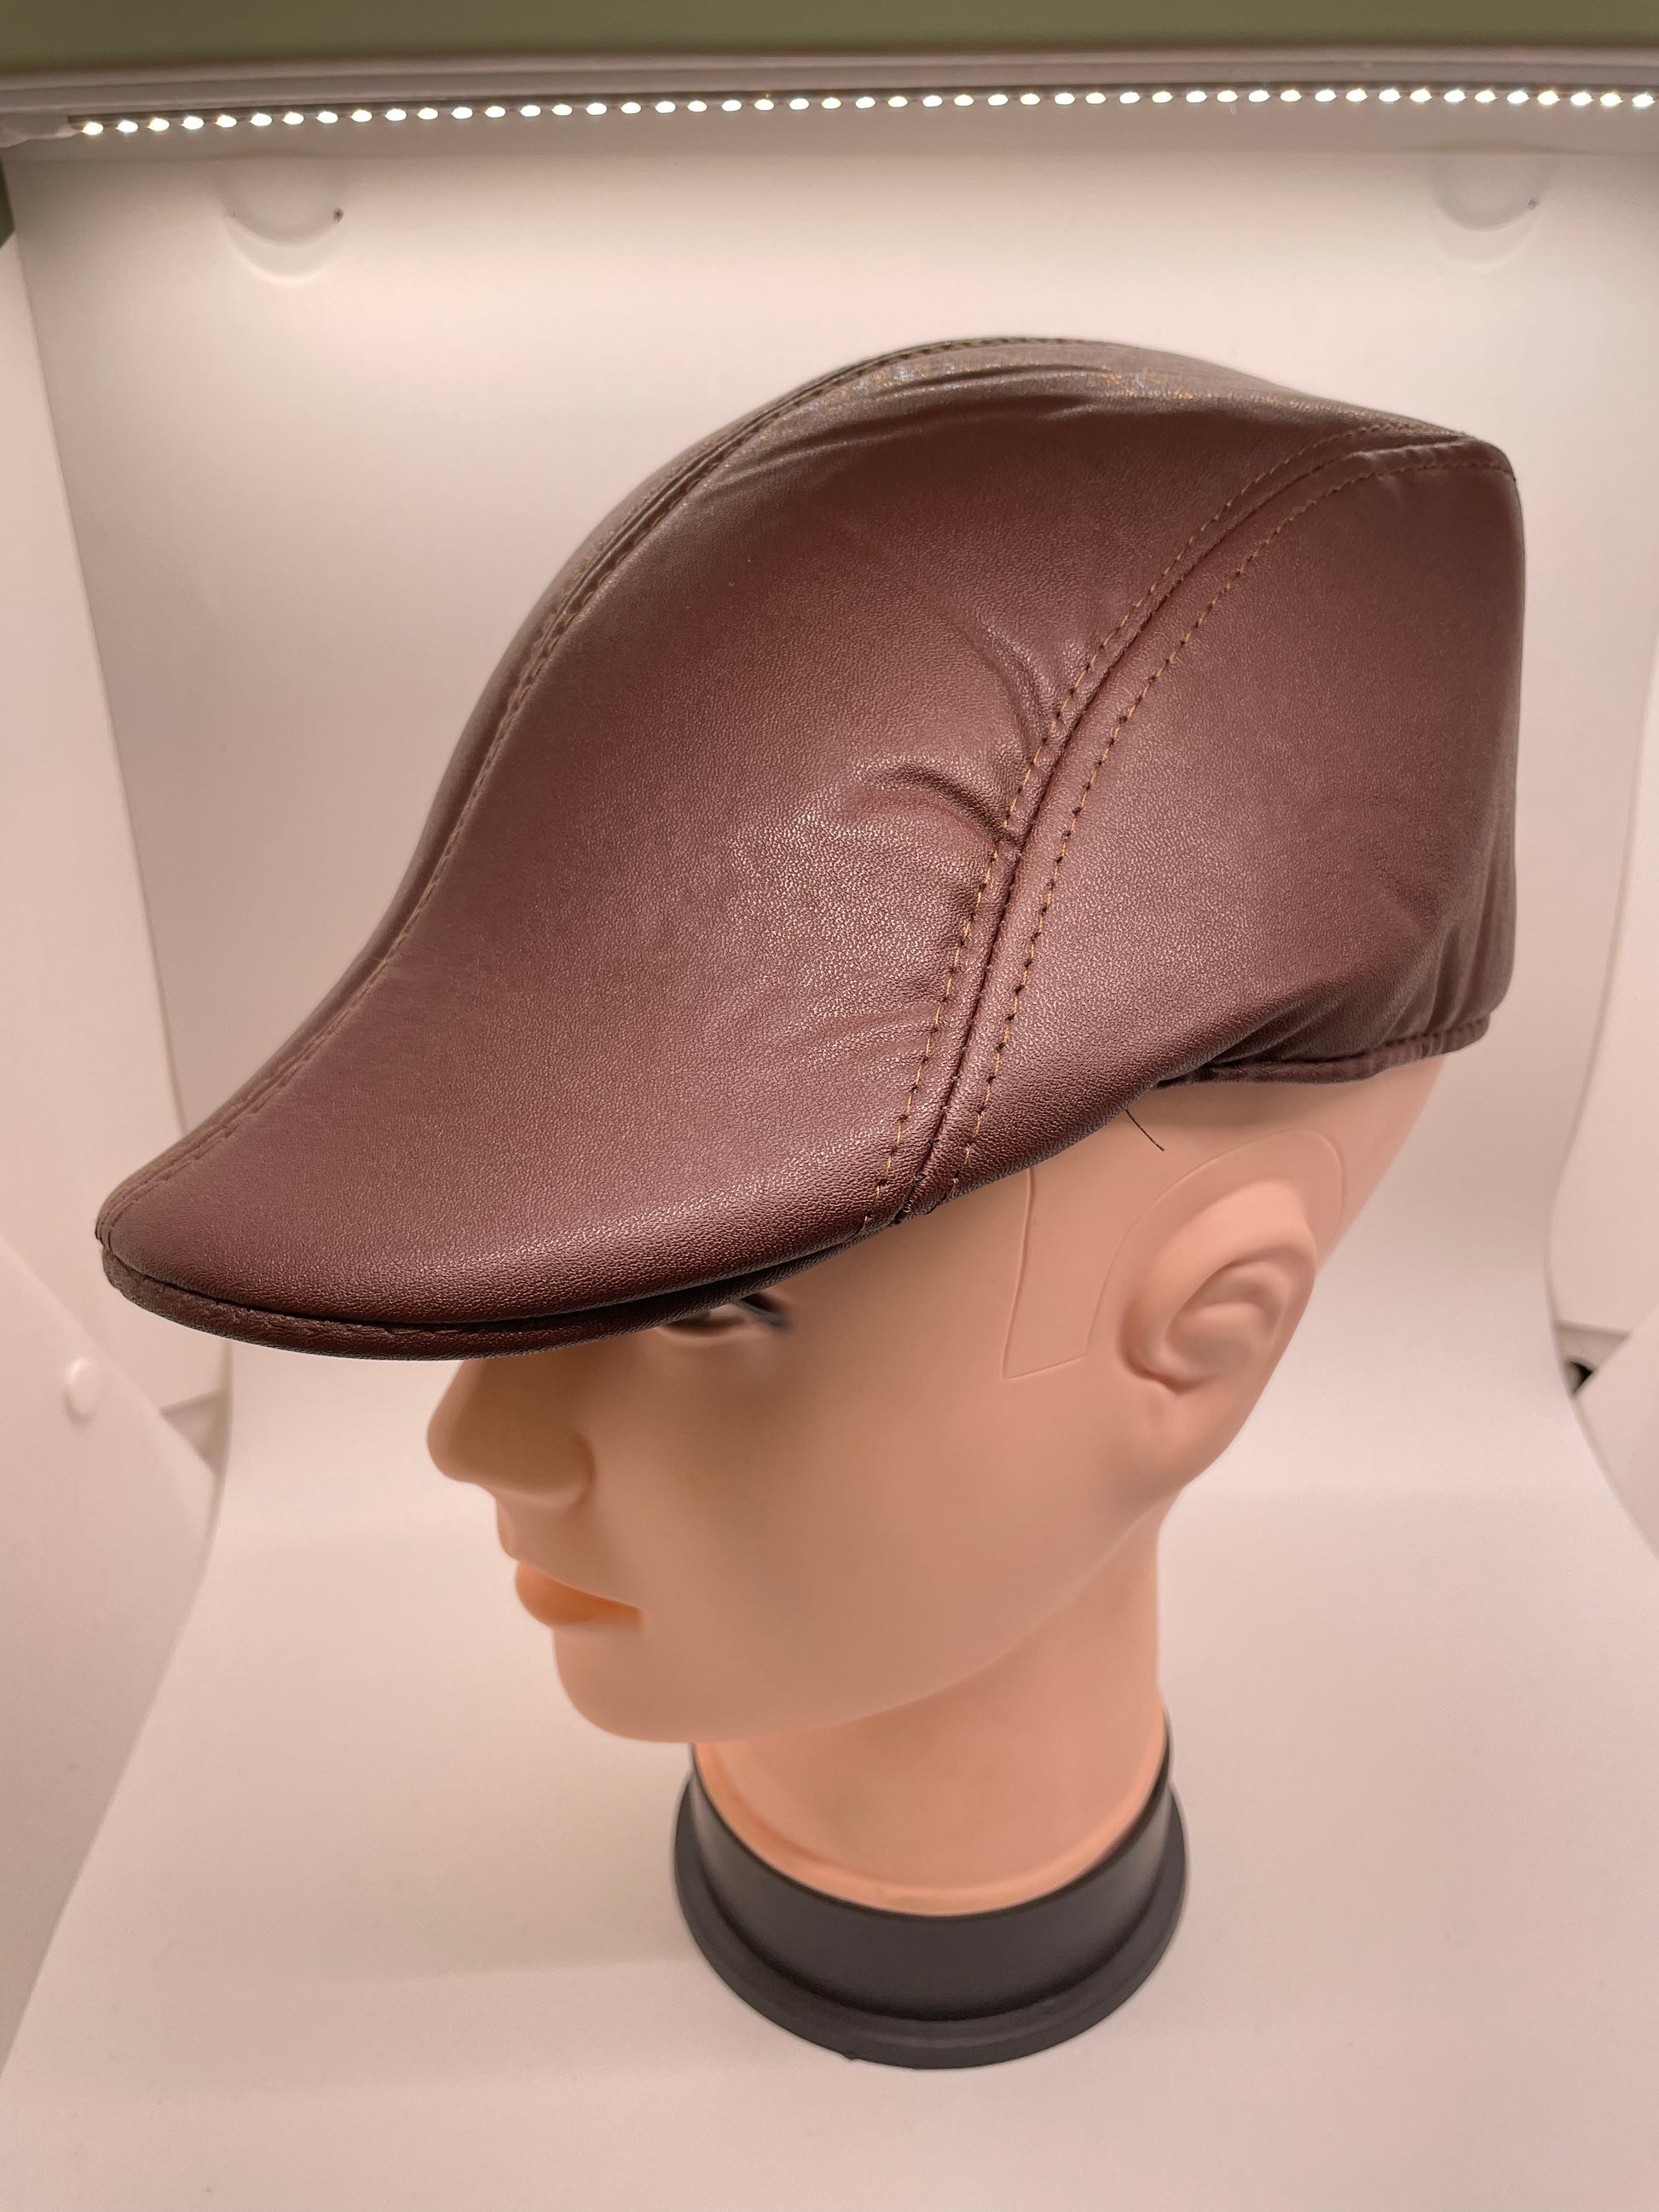 "Gray leather flat hat with a padded headband and a stretchy fit"